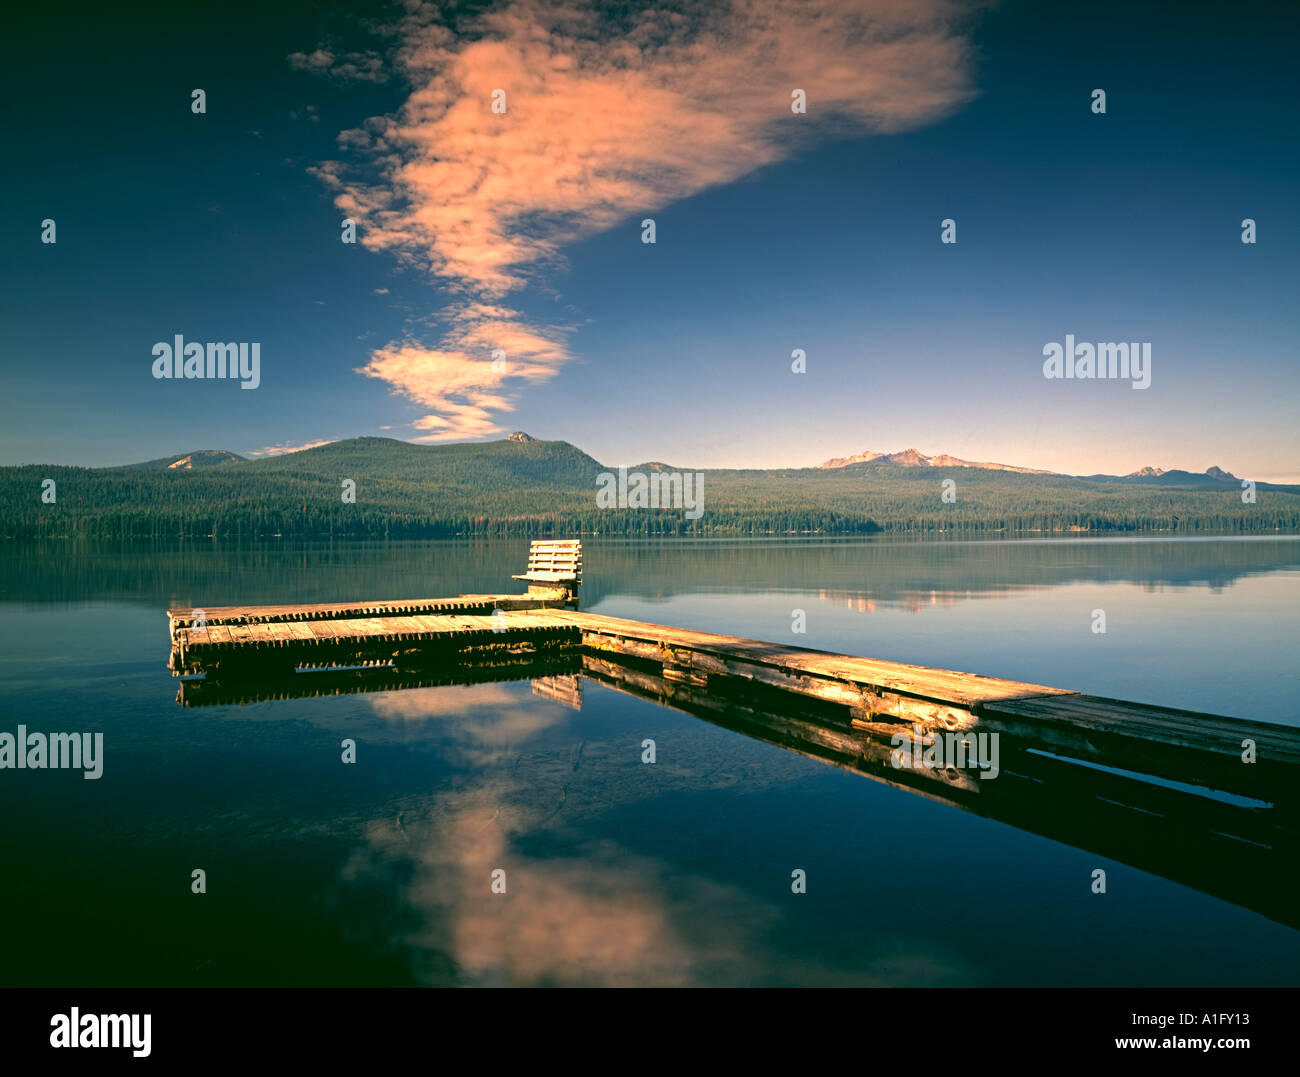 Dock with bench and reflection in Odell Lake Oregon Stock Photo